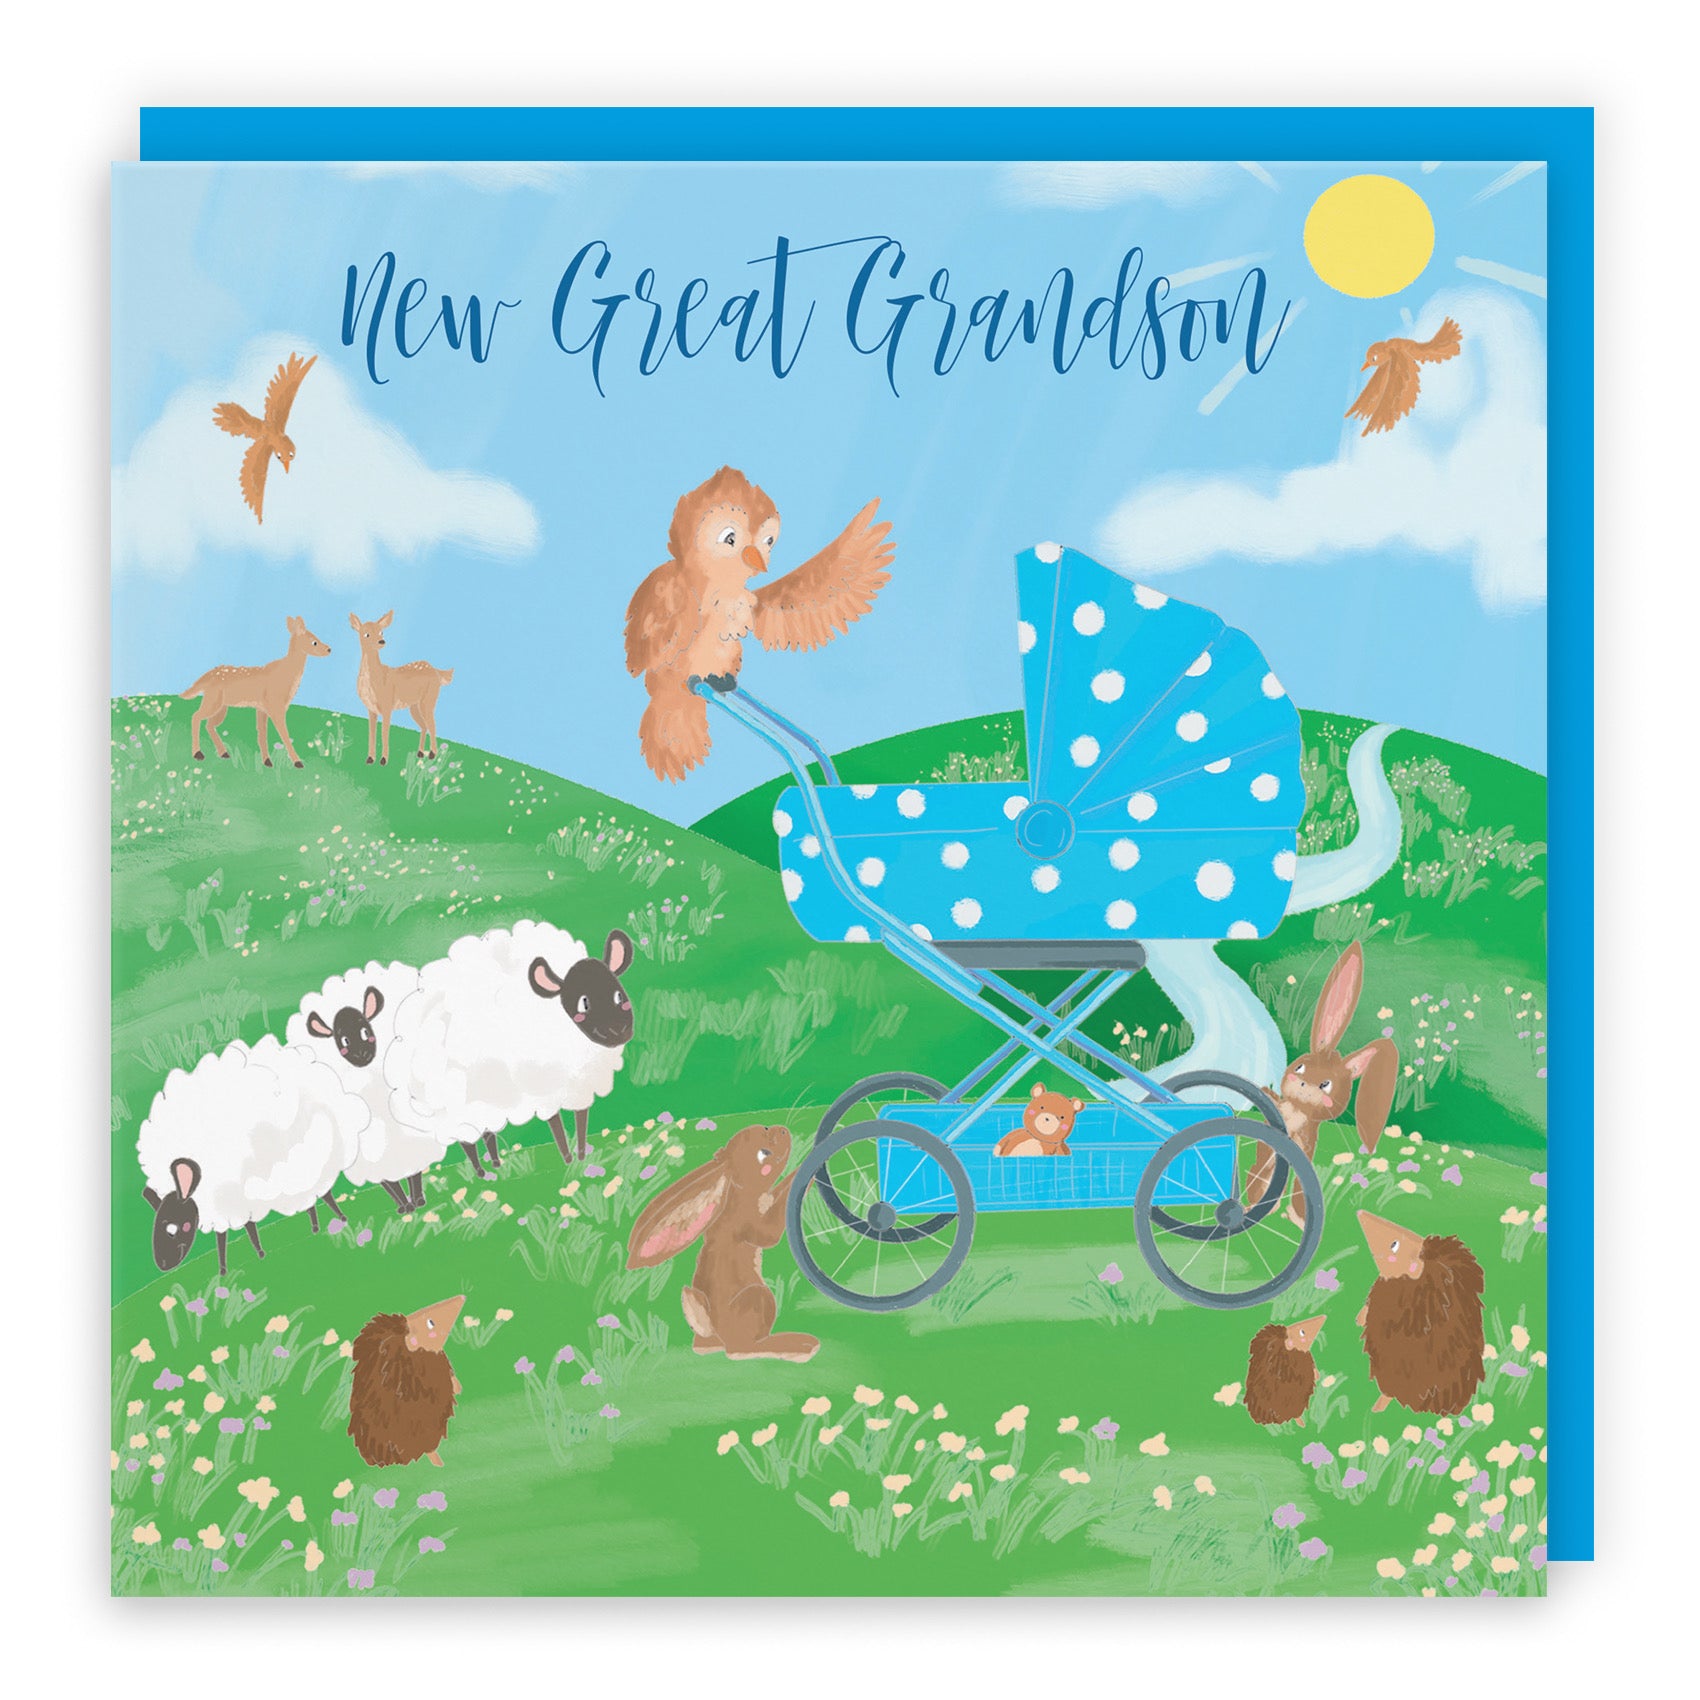 New Great Grandson New Baby Congratulations Card Countryside - Default Title (B09VMKW4QW)